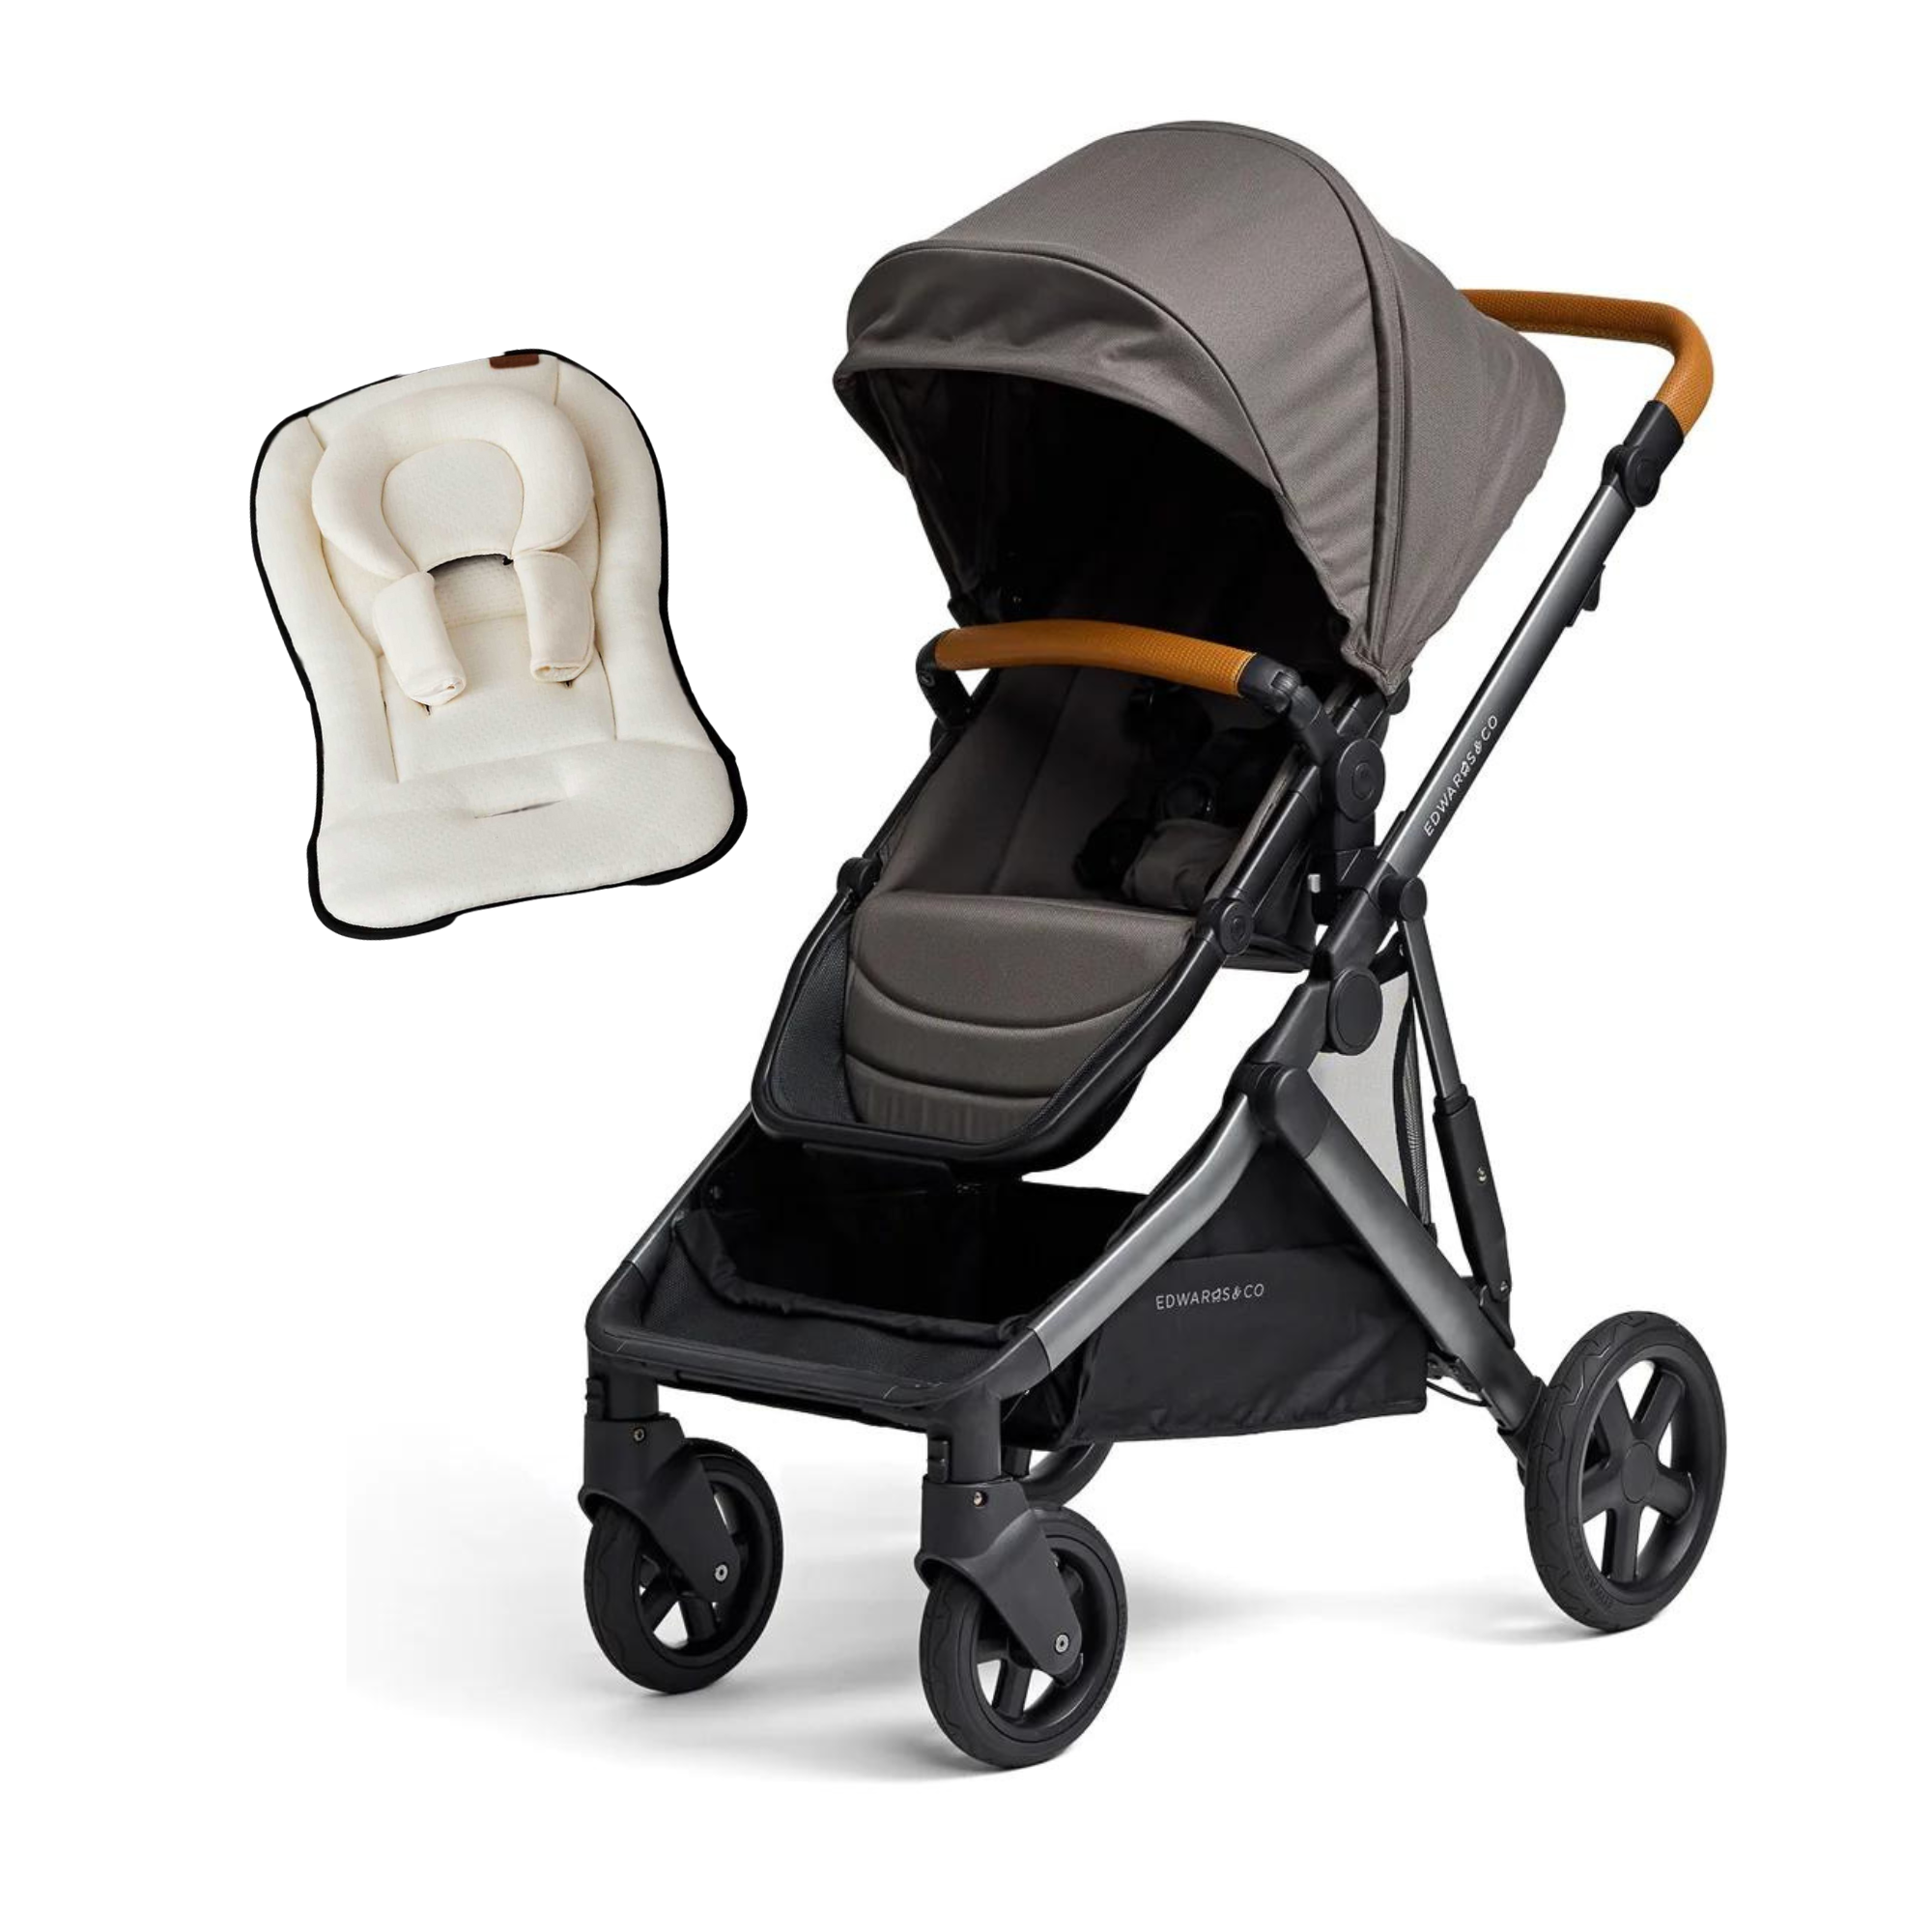 Edwards & Co Olive Stroller FREE Infant Insert (sale ends 21/6) - Tiny Tots Baby Store 